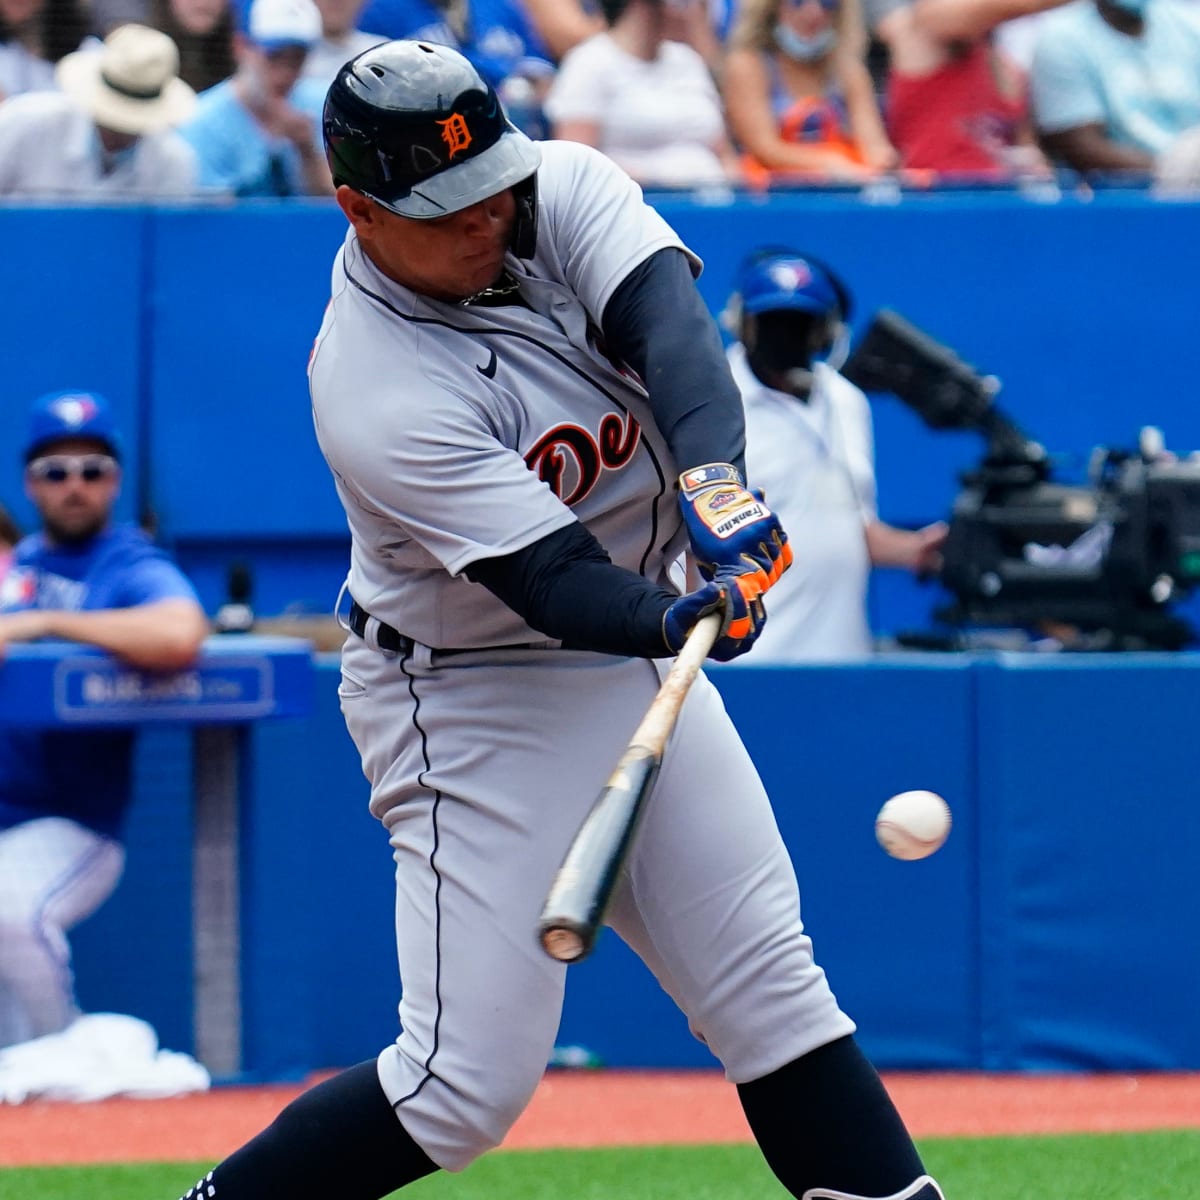 Florida Marlins and National League leading hitter Miguel Cabrera